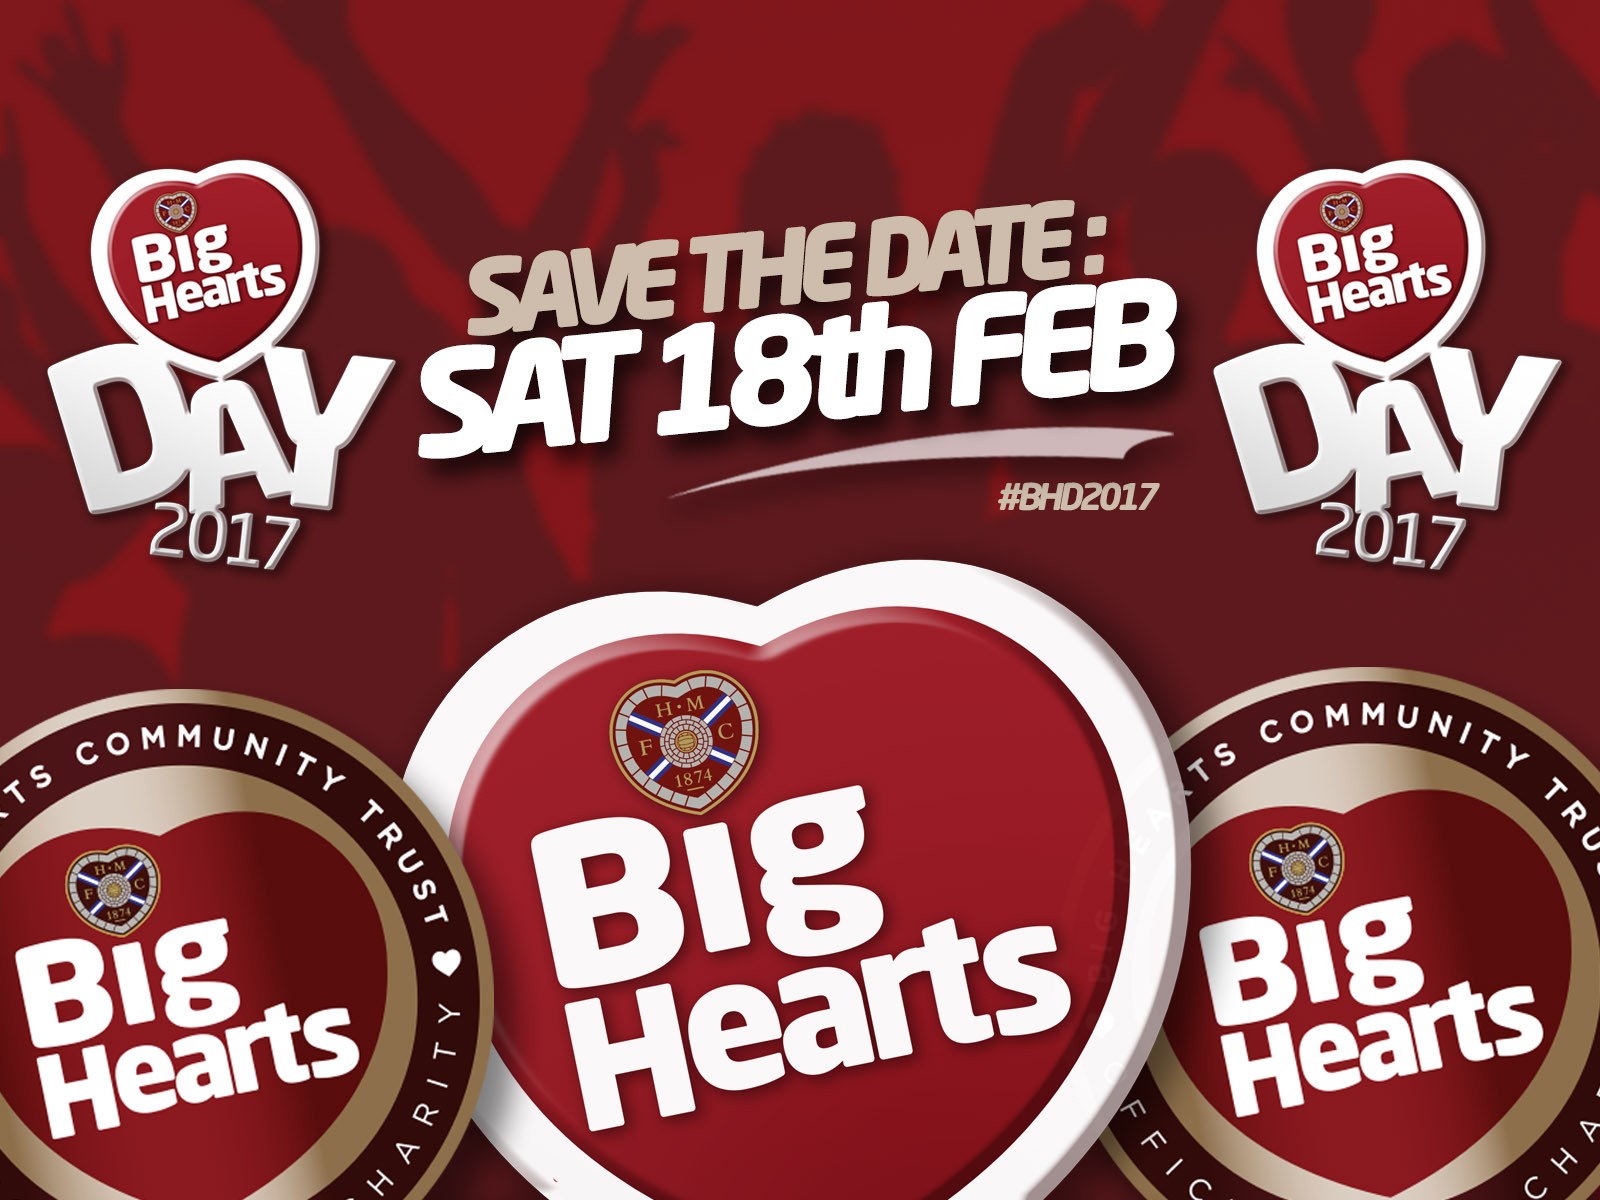  » Big Hearts Day 2017 – Save the date!